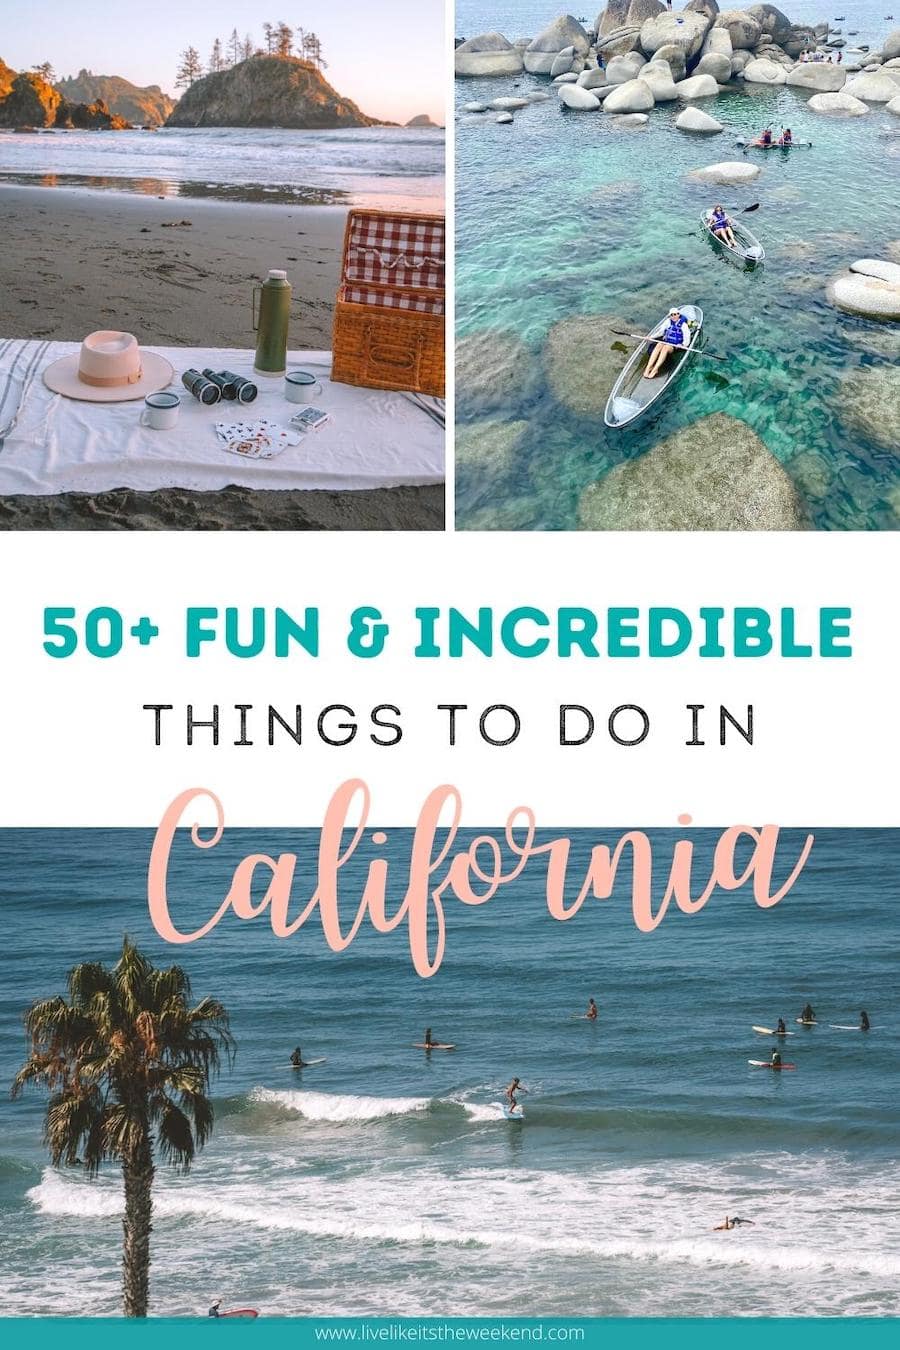 Pin cover for blog post on 50+ fun things to do in California